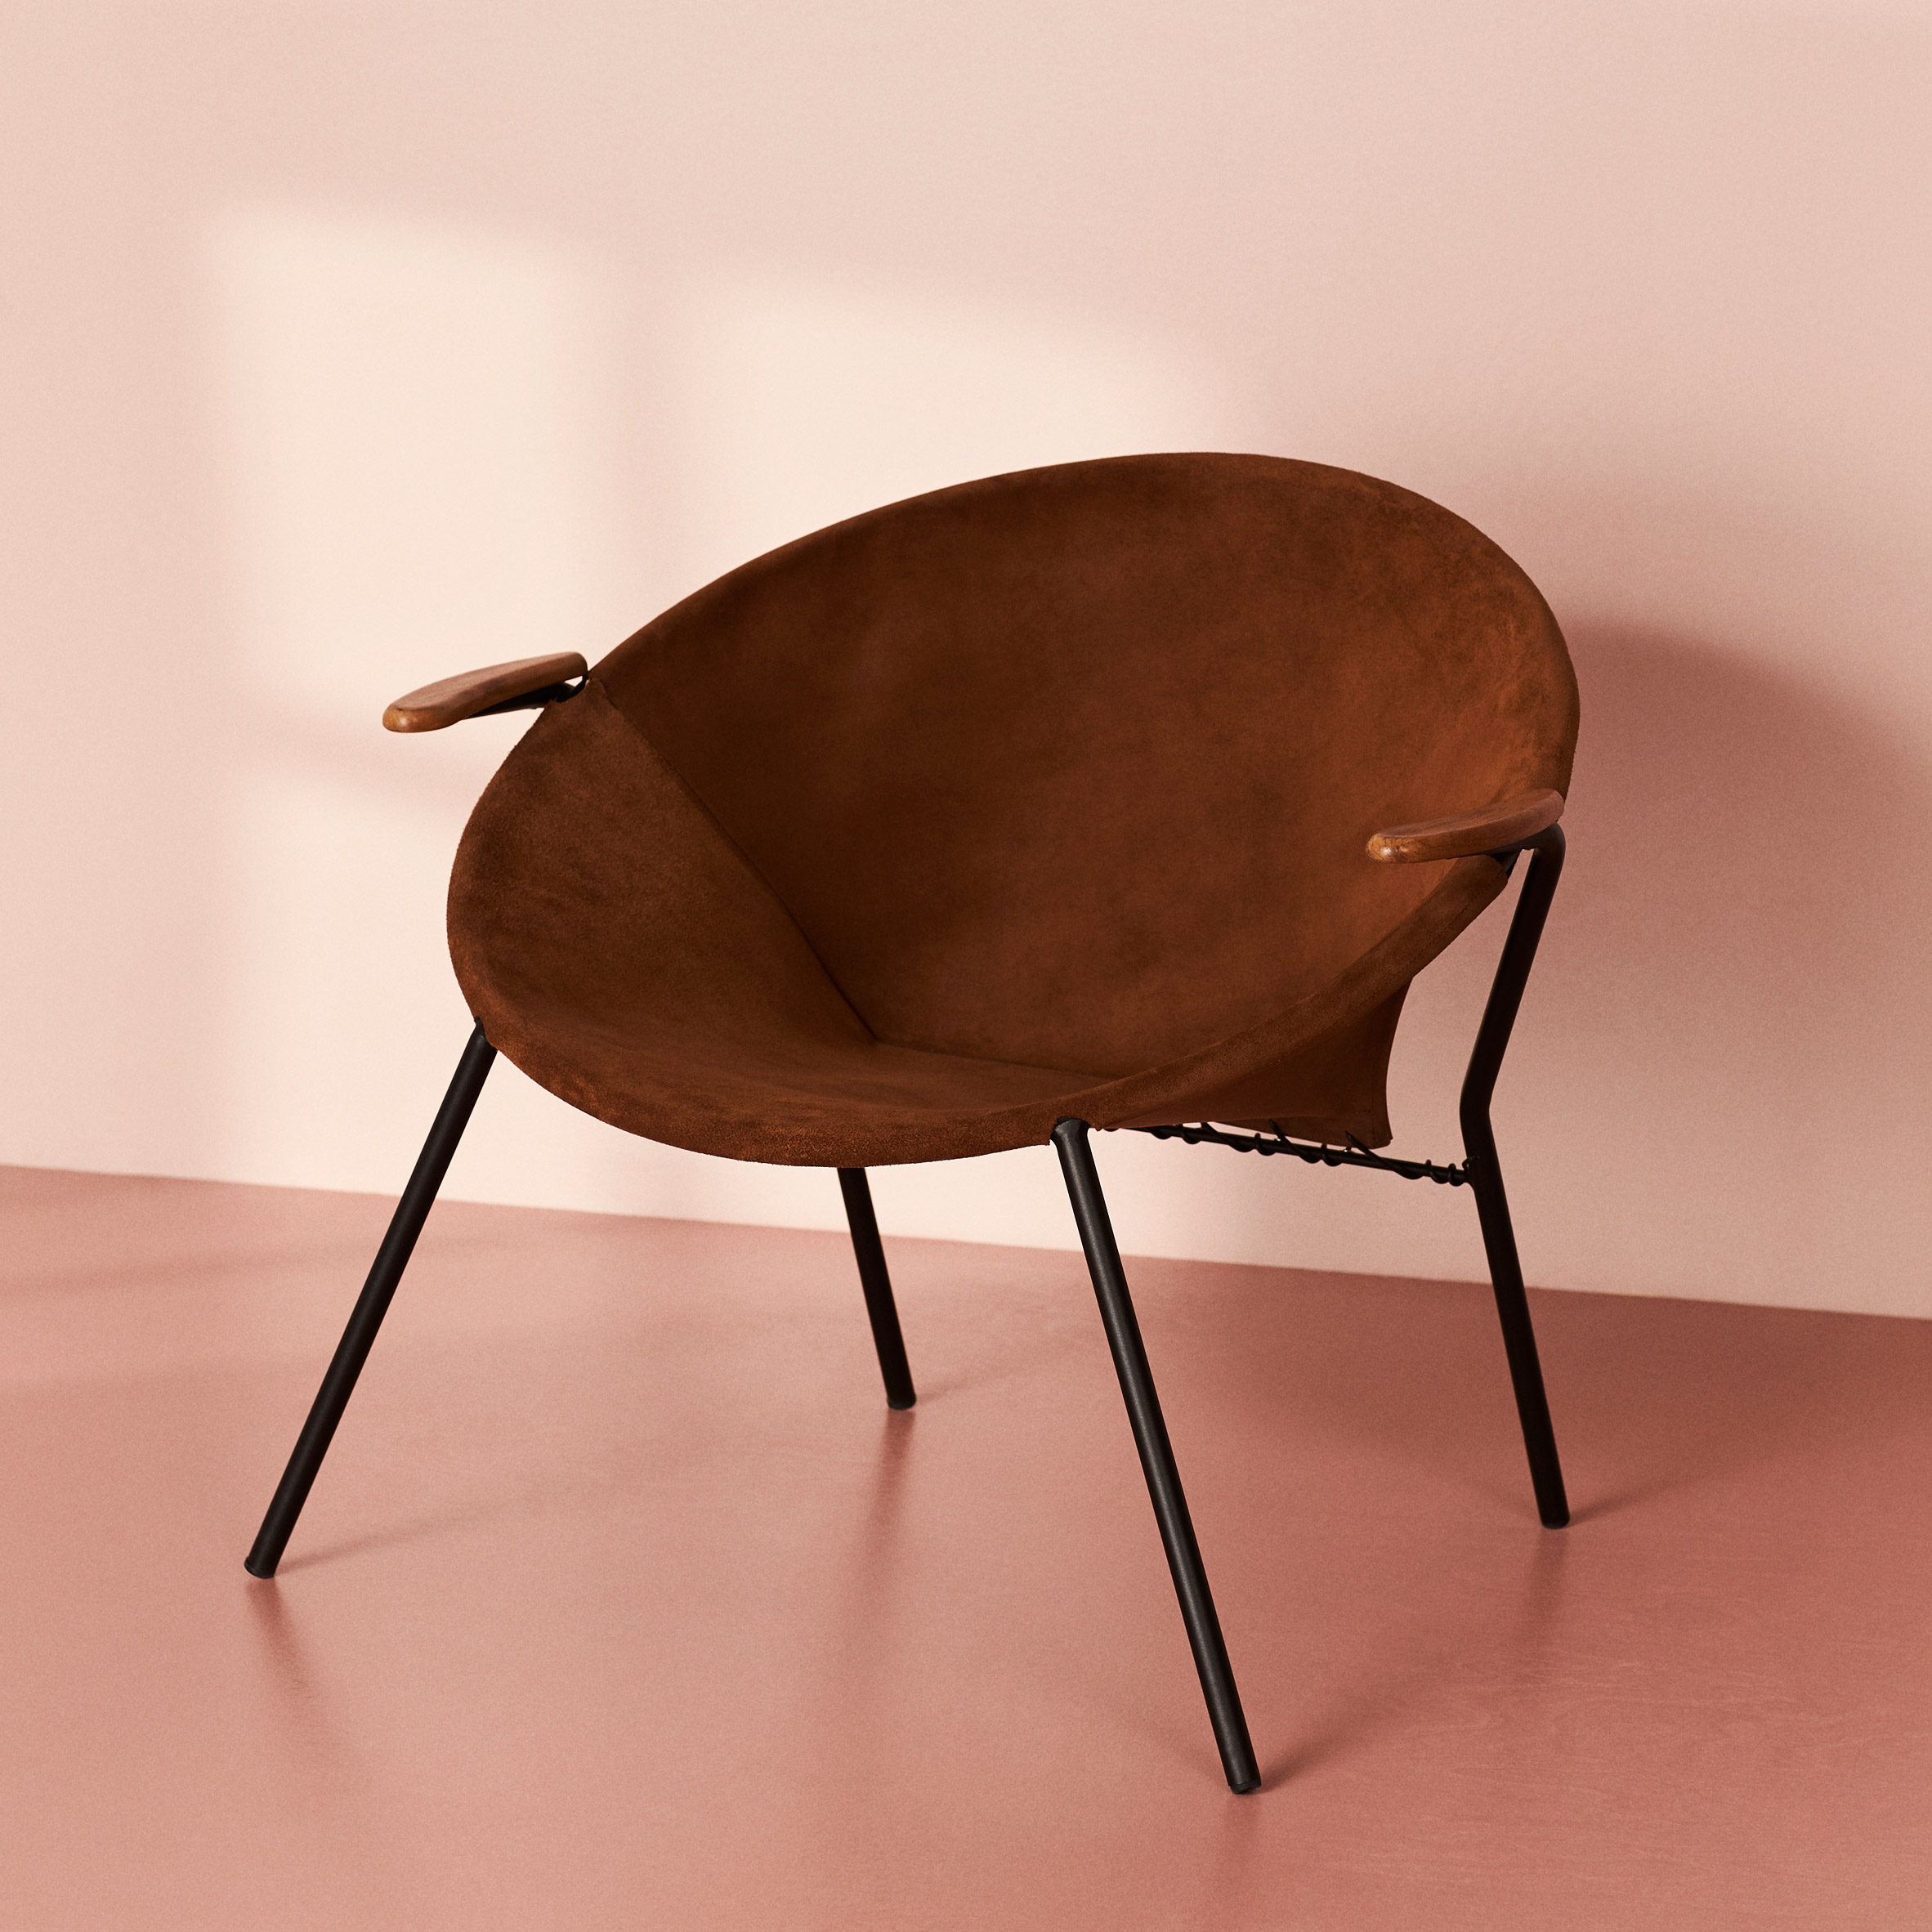 Balloon by Hans Olsen, 1950s - Mid-century furniture designs relaunched at Stockholm Design Week